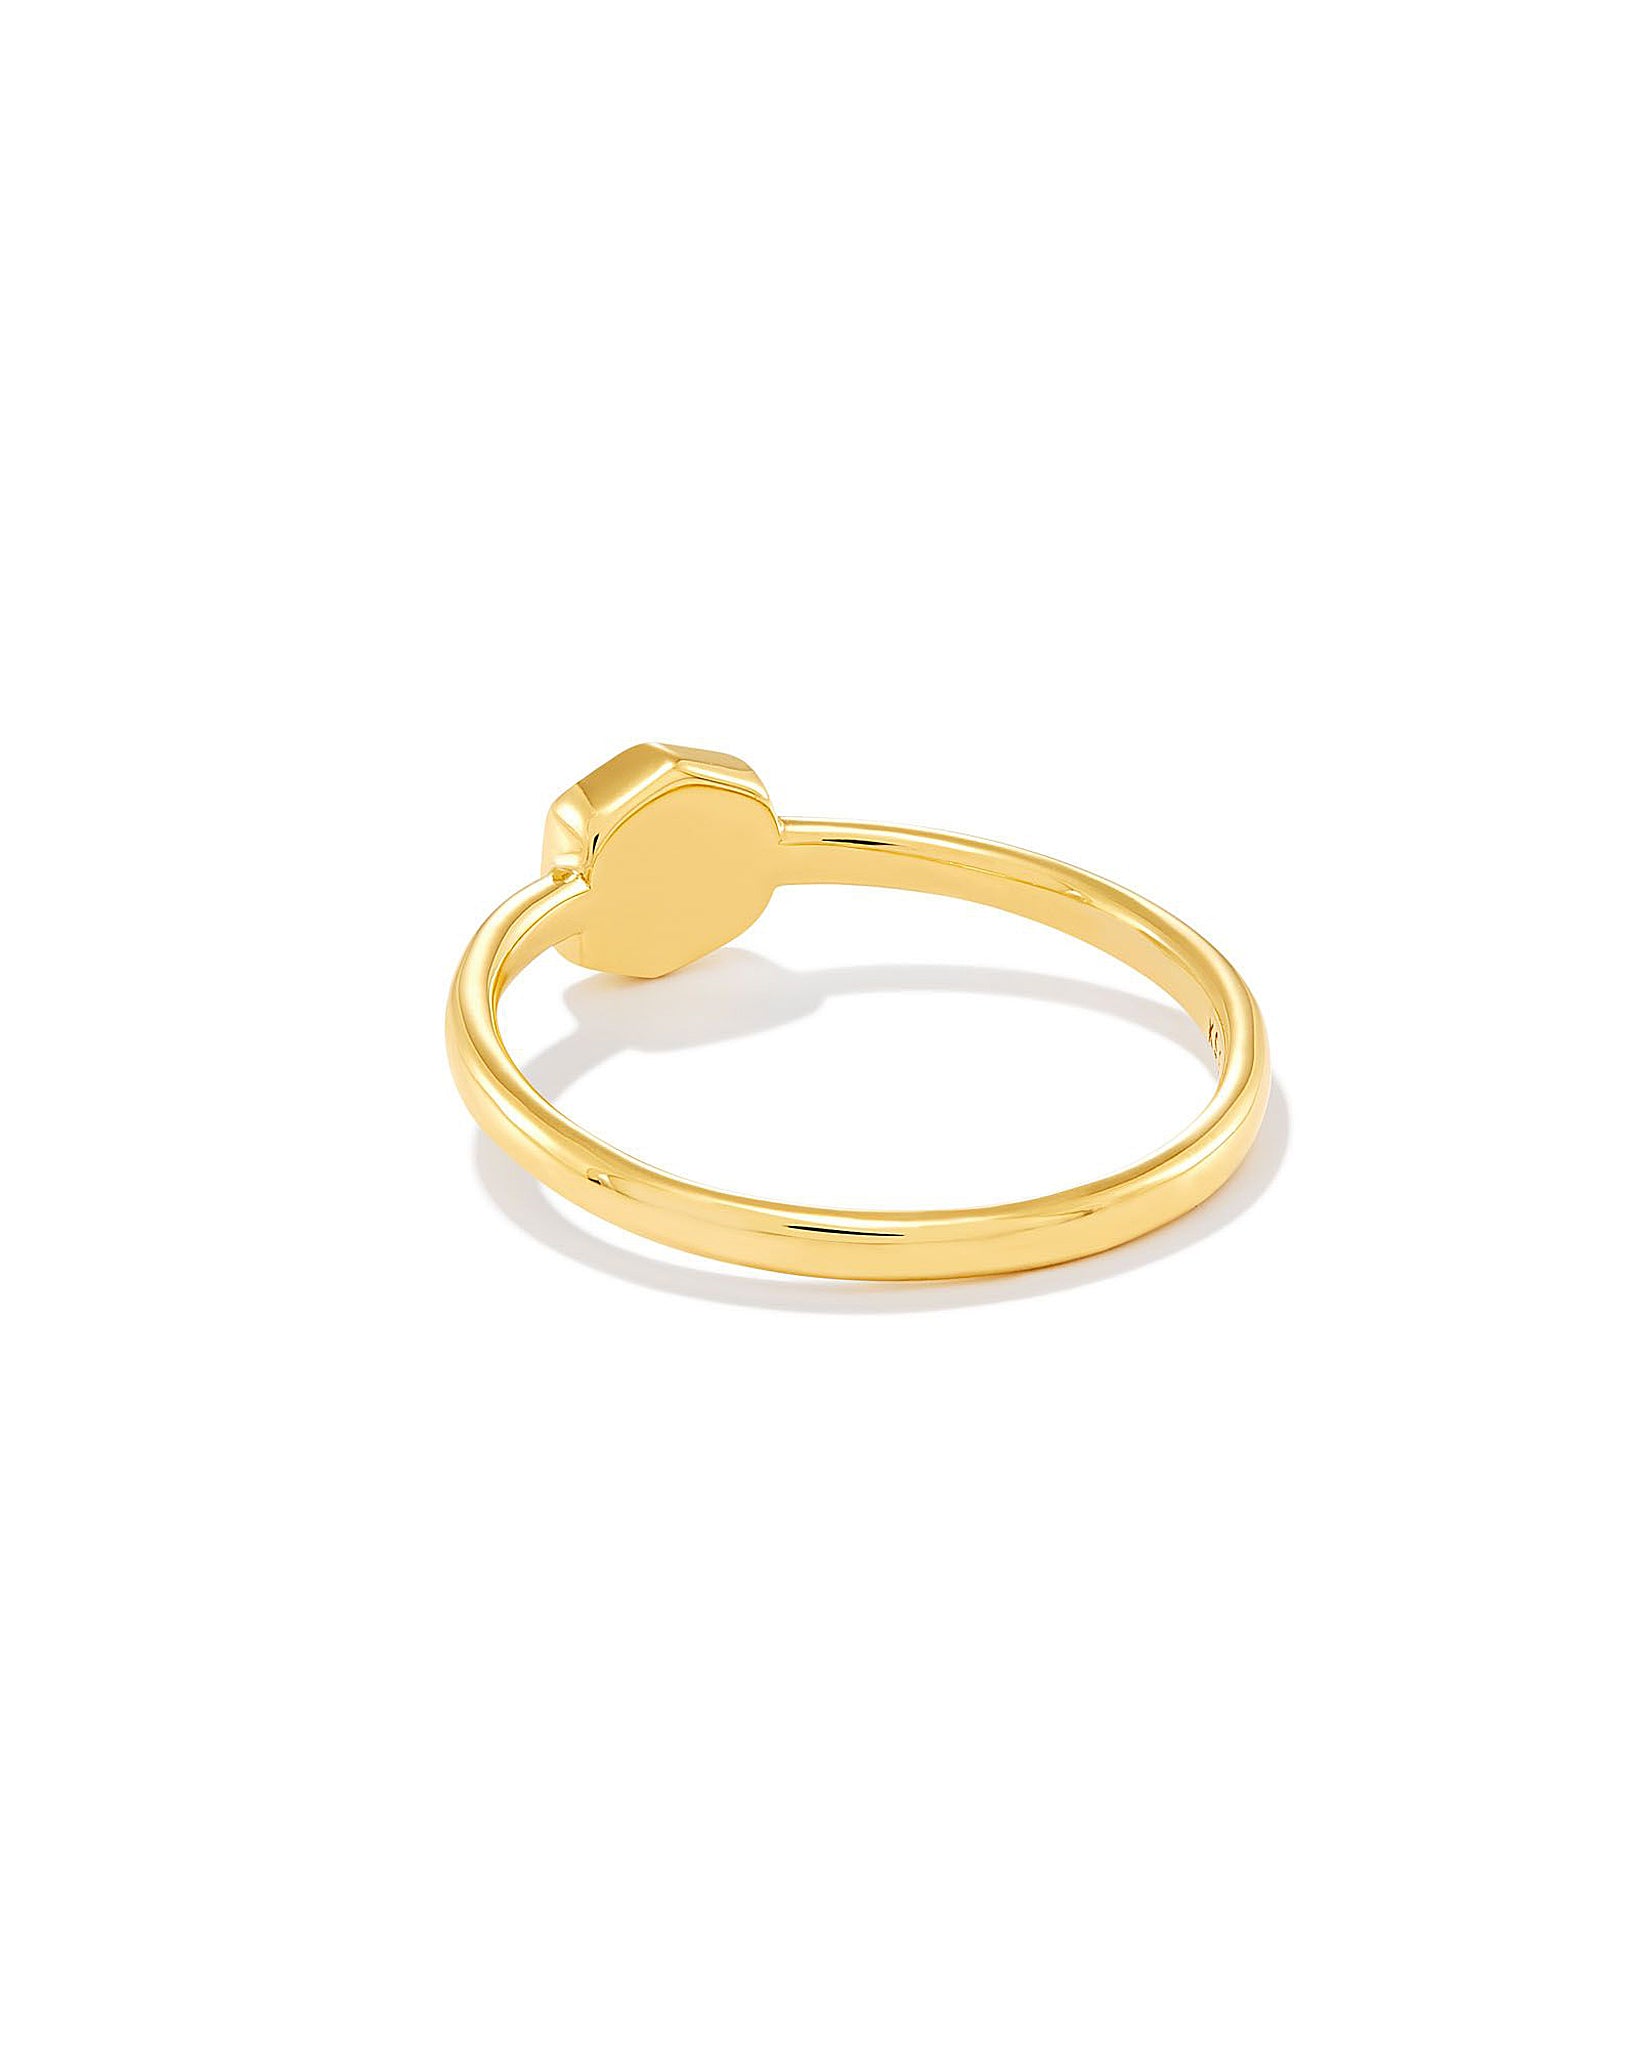 Kendra Scott Davie Band Ring in Clear Rock Crystal and 18k Gold Vermeil Size 7